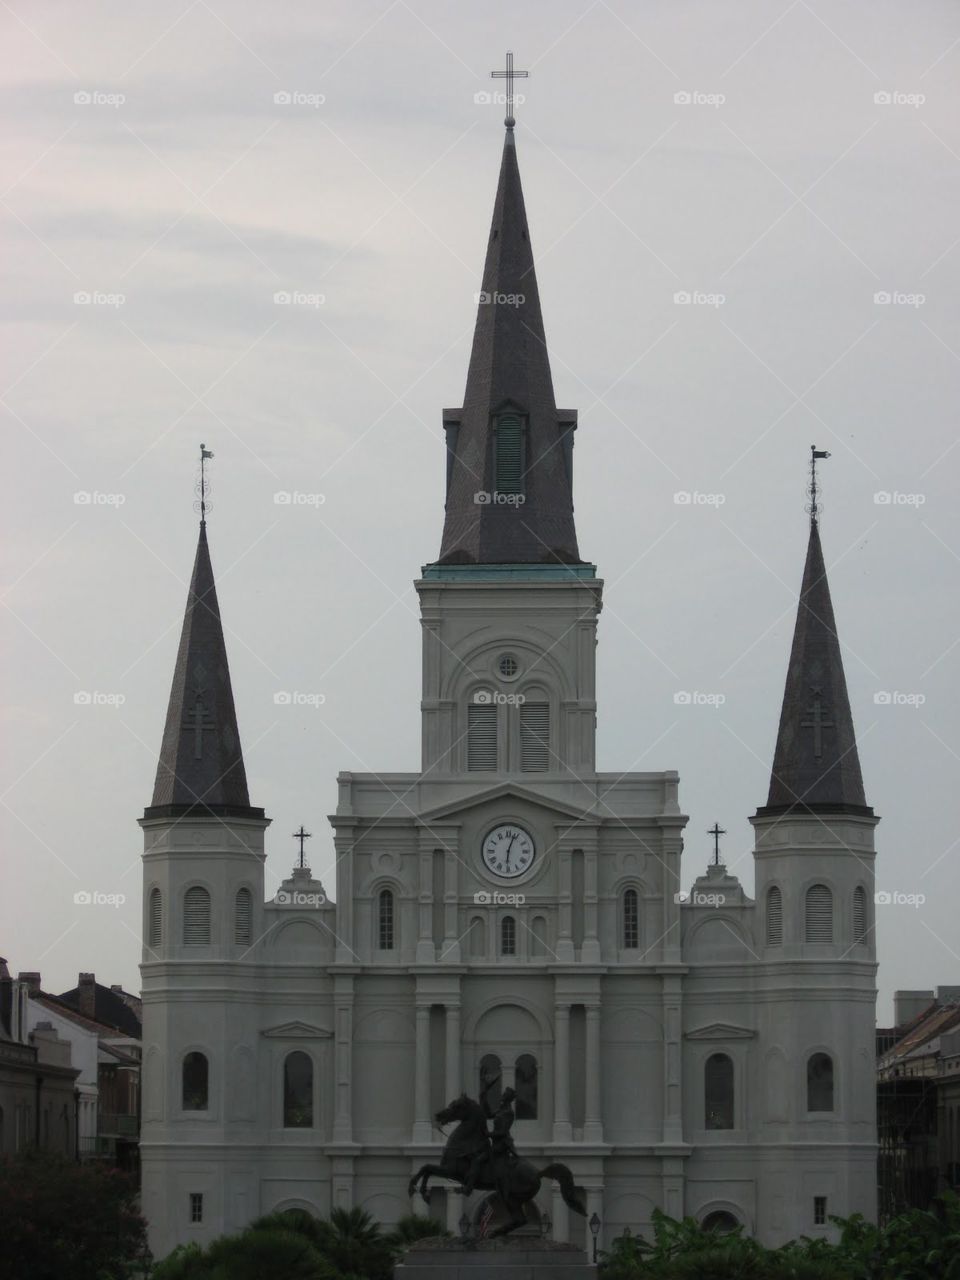 Cathedral-Basilica of Saint Louis,
King of France, Jackson Square, New Orleans